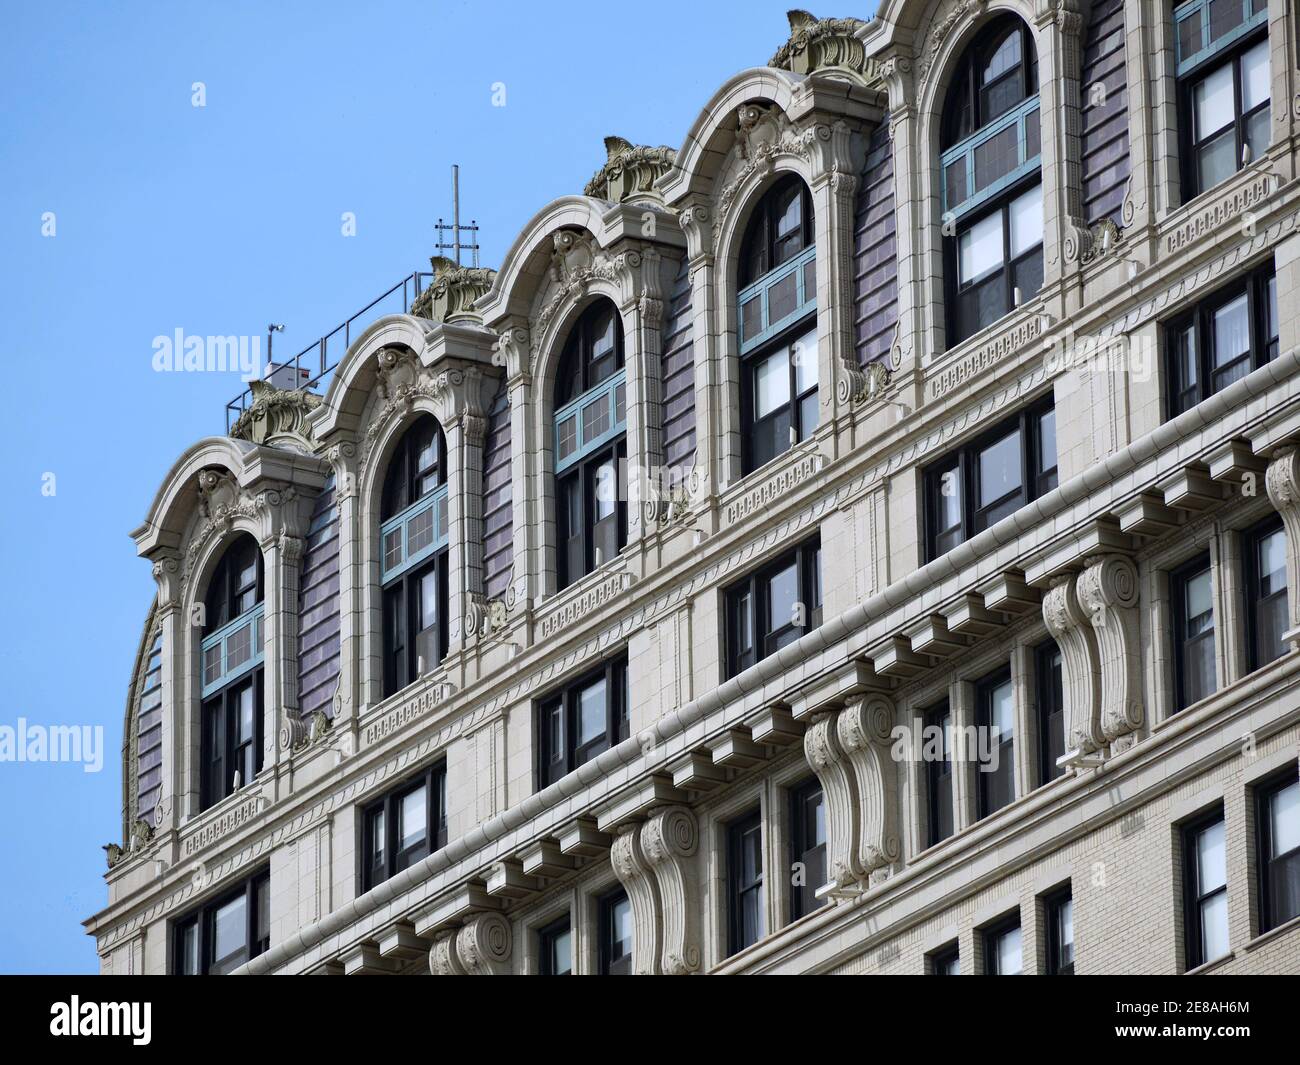 Close-up view of baroque ornamentation at the top of an old luxury apartment building Stock Photo